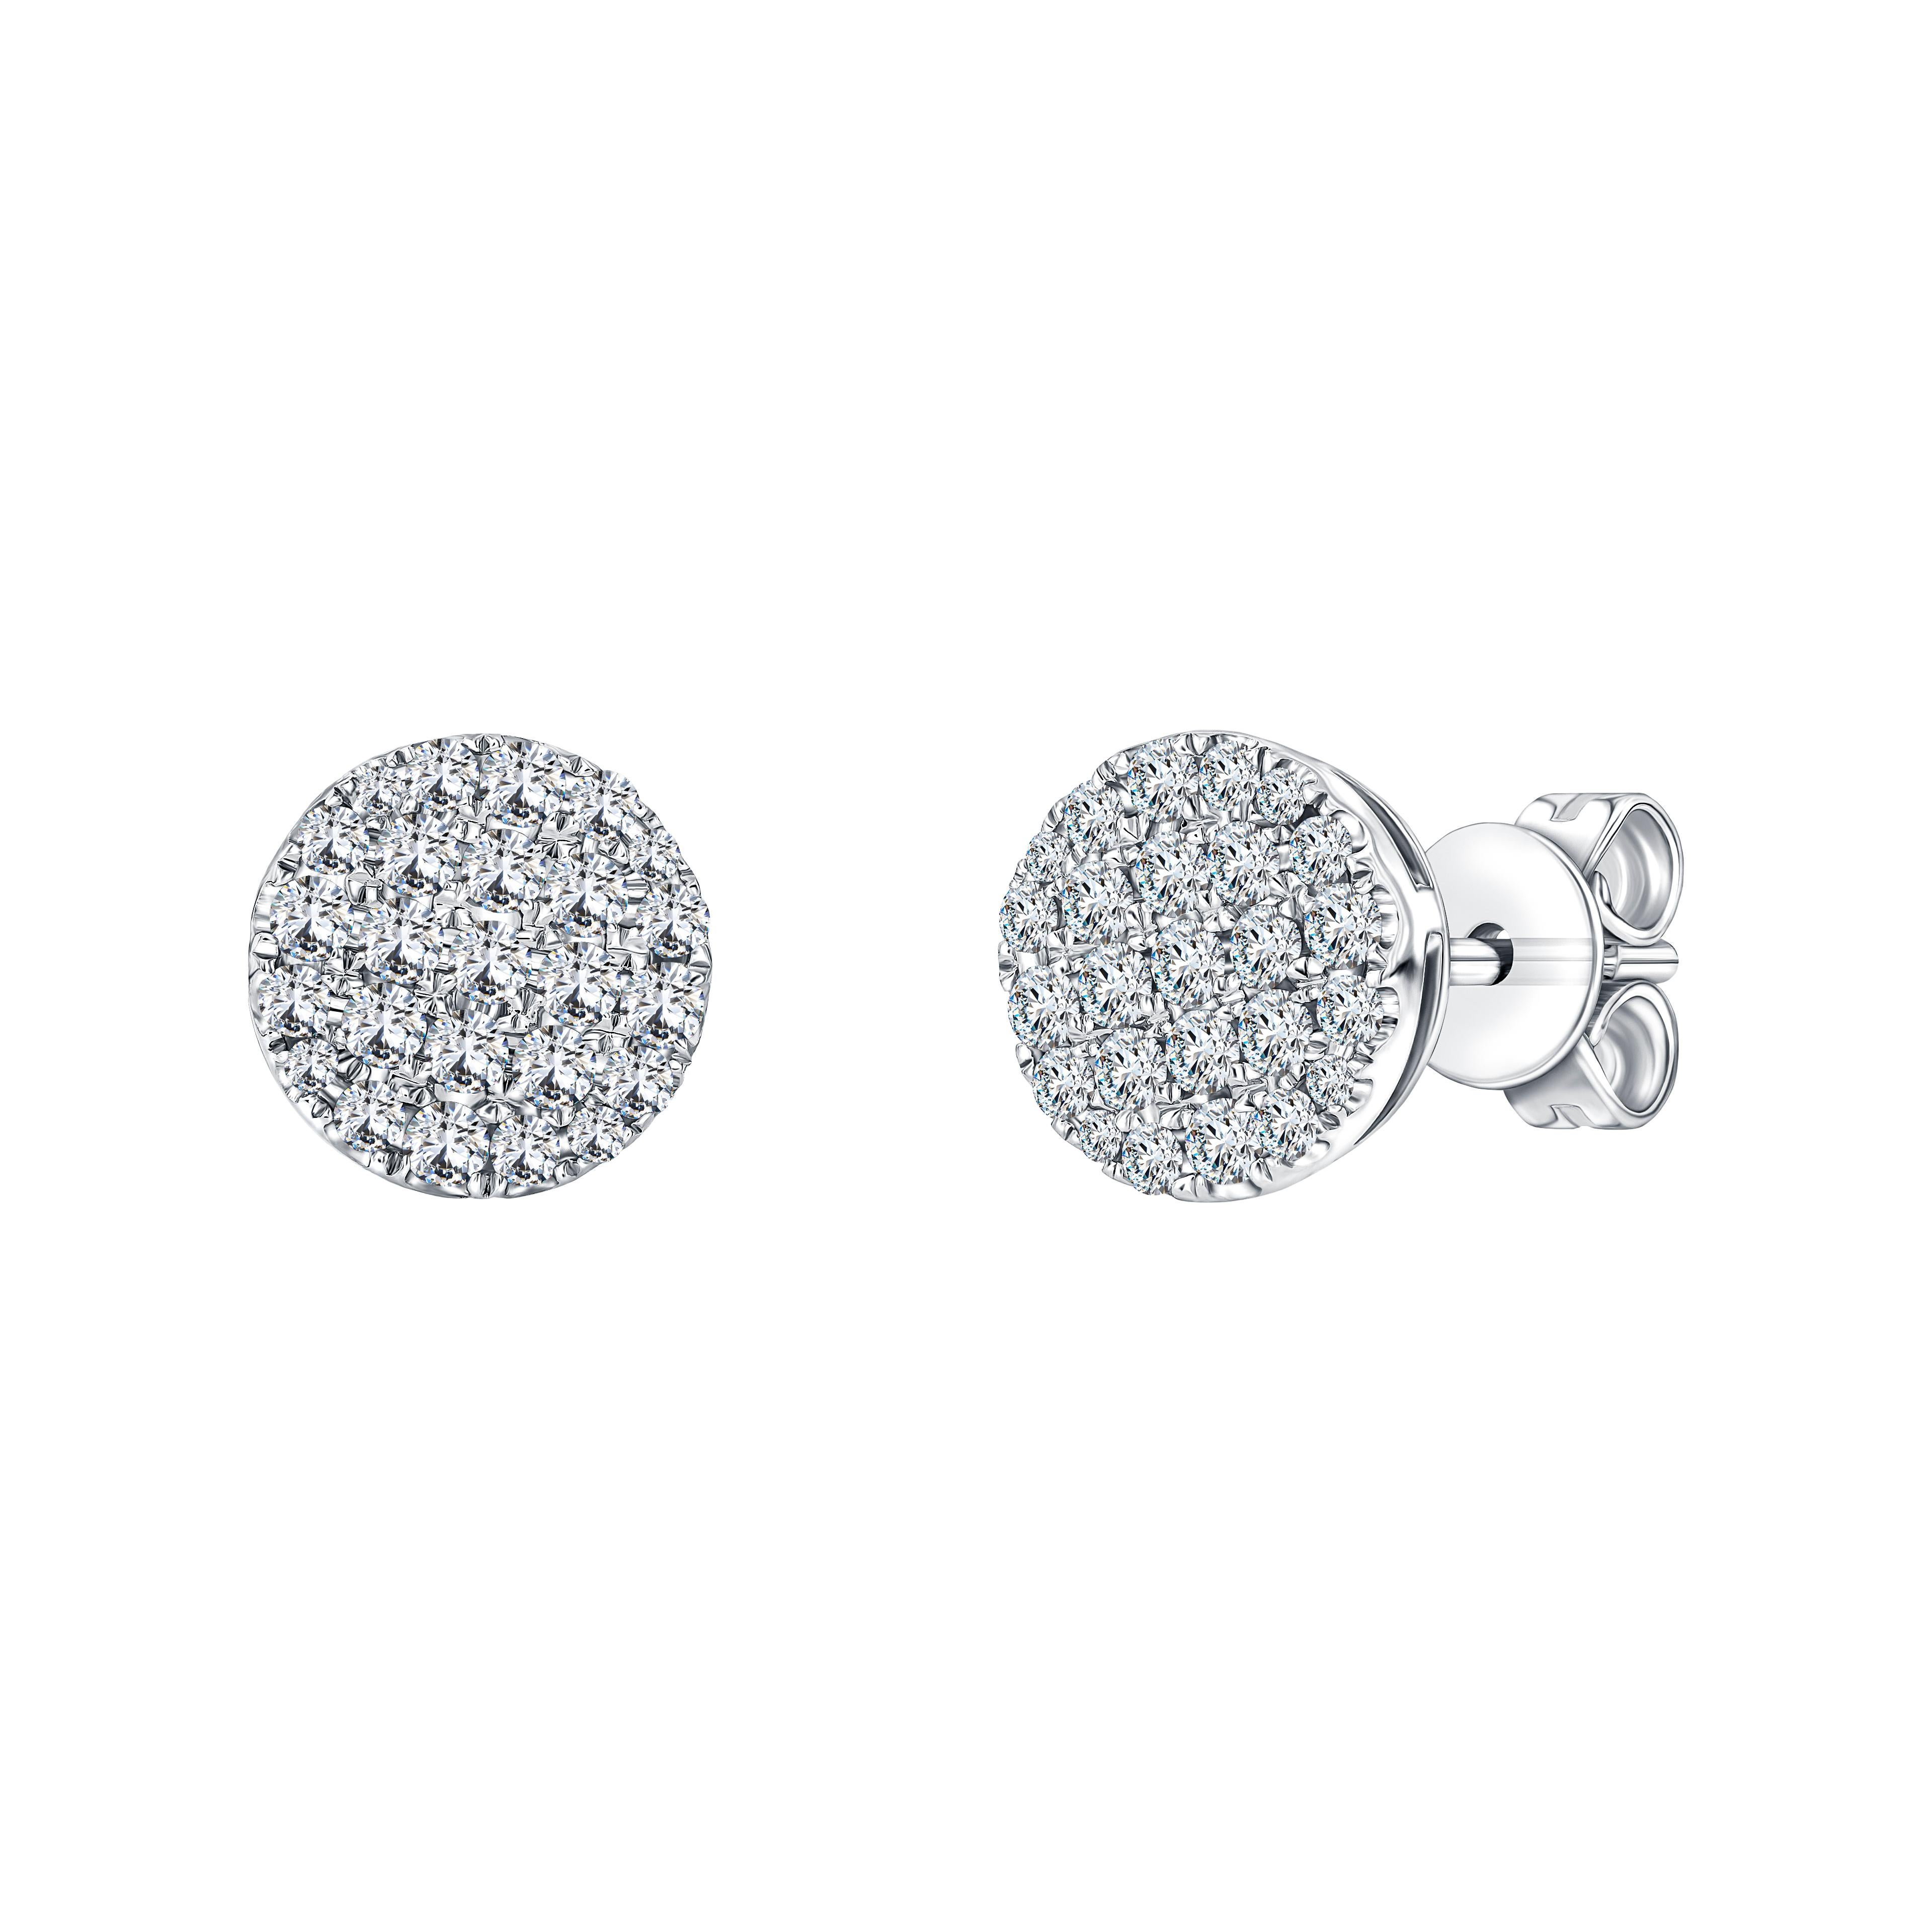 These eye catching elegant Round Brilliant Diamond cluster stud earrings featuring H-SI diamonds that sparkle, set in 18kt White Gold. These button shaped pave set cluster studs have a total diamond weight of 0.66 Carats and a diameter measurement